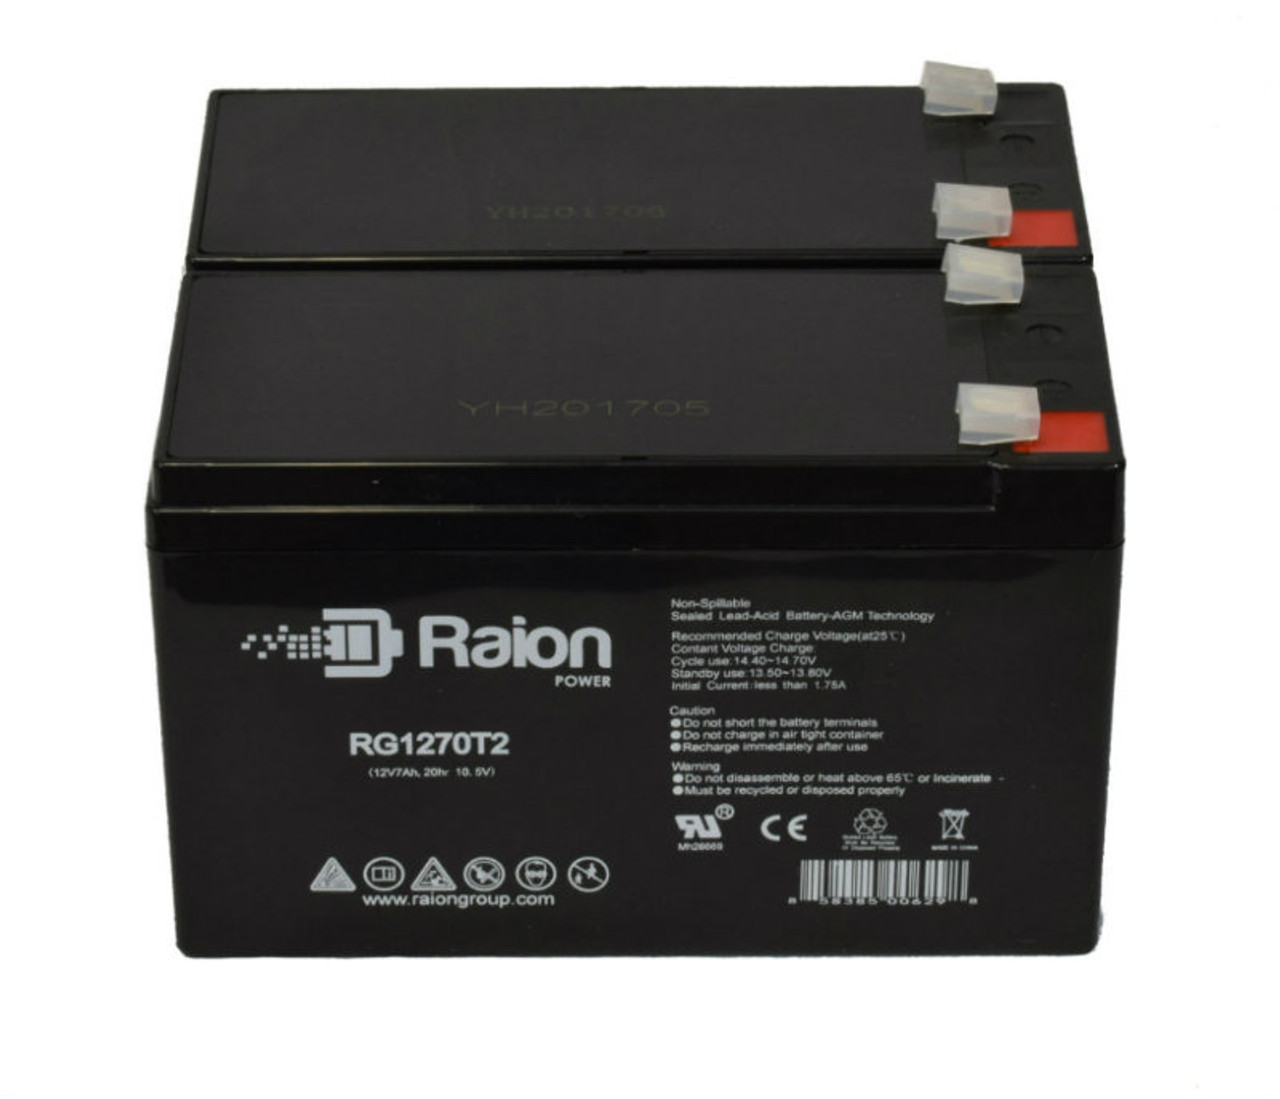 Raion Power Replacement 12V 7Ah Battery for Vision CP1272 F1 - 2 Pack